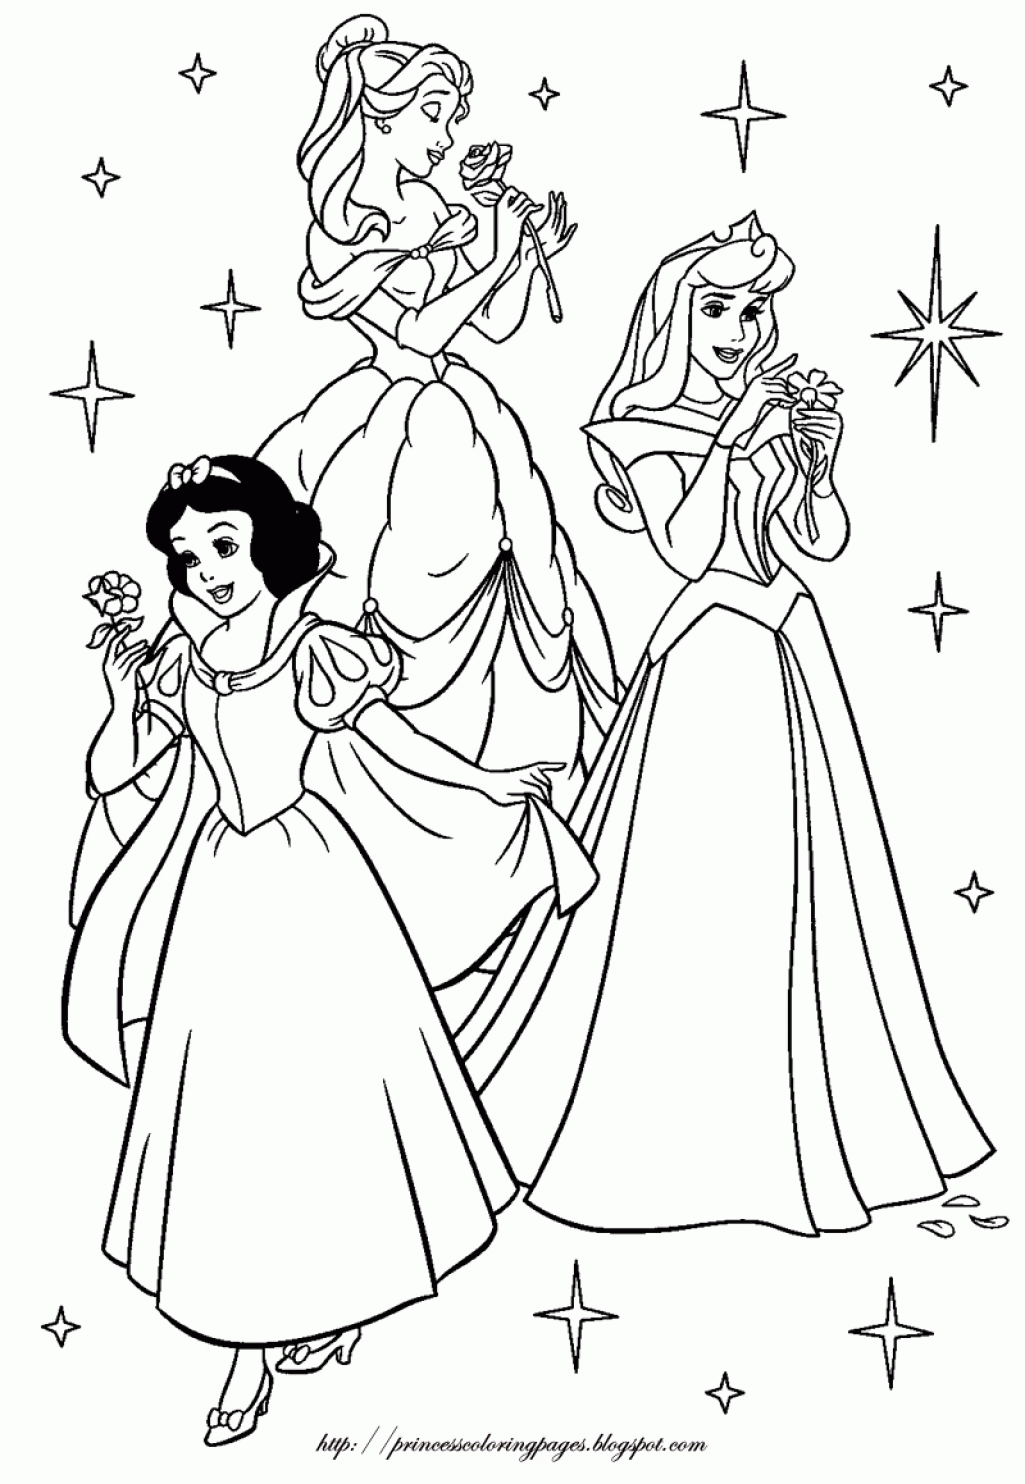 Disney Princess Colouring Pages Pdf   Step ColorinG   Coloring Home